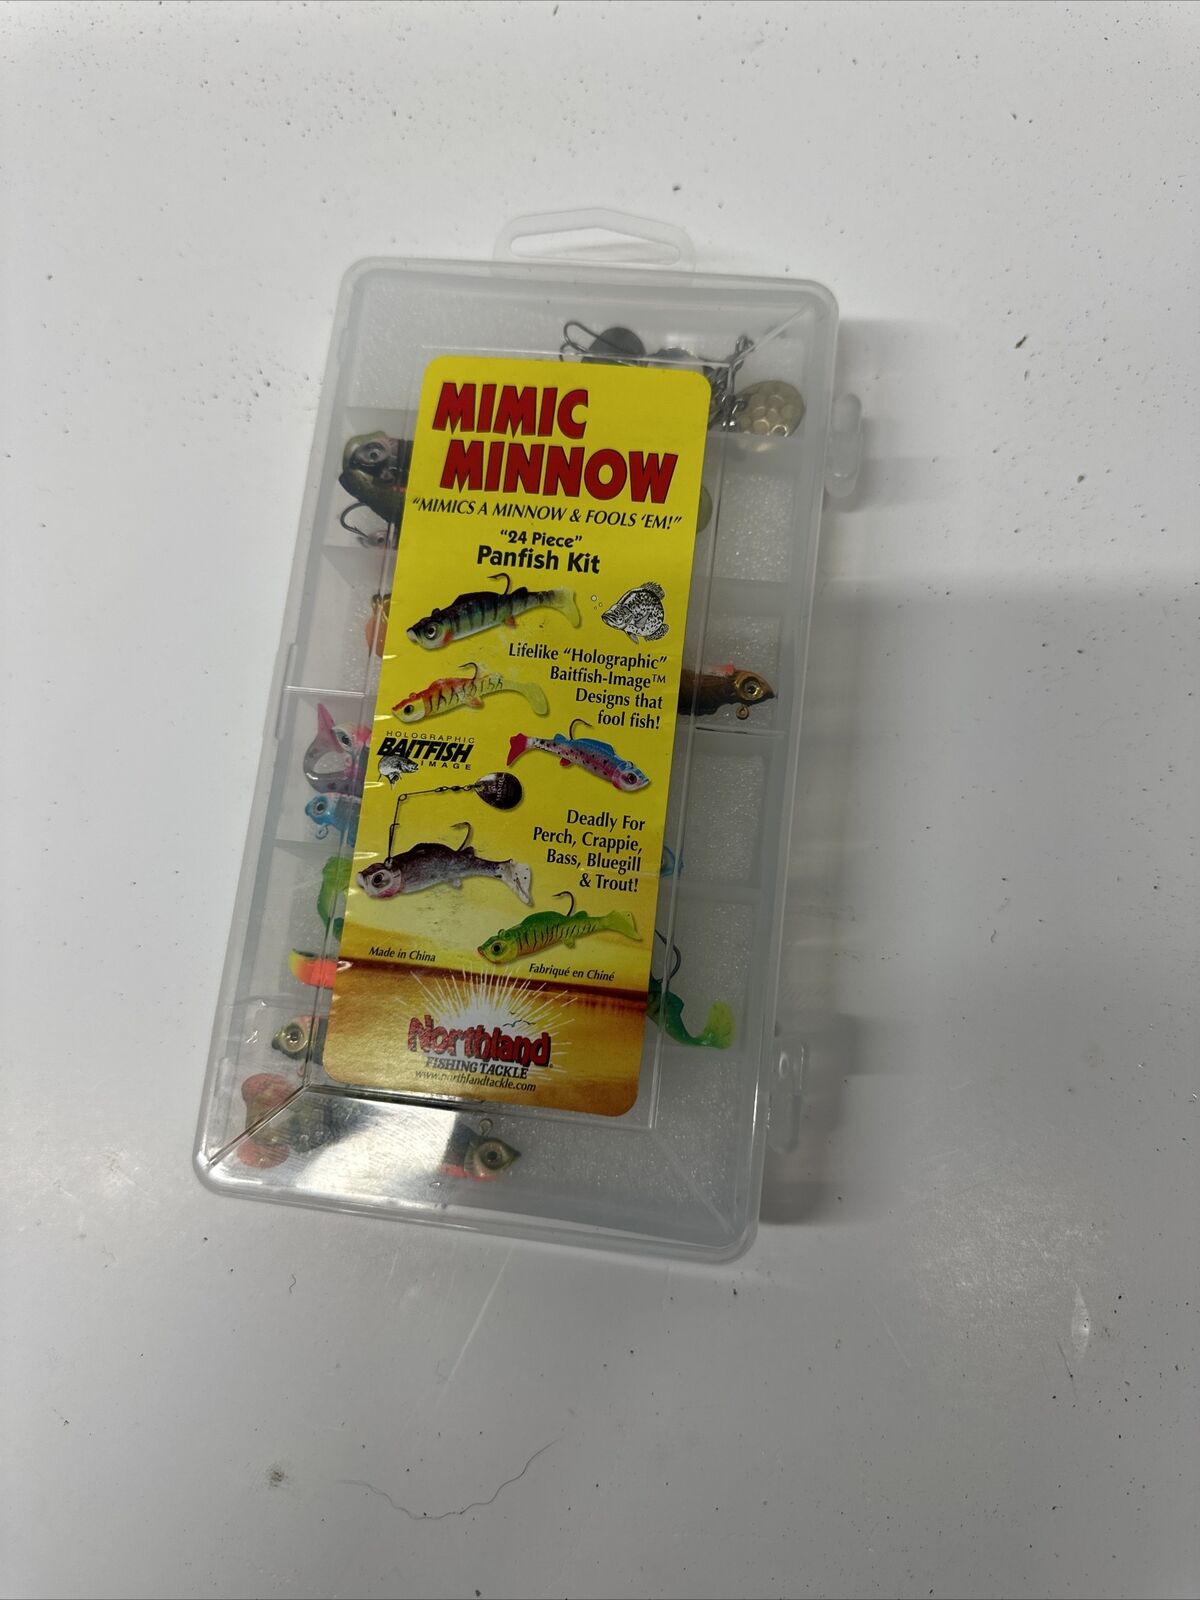 Northland Mimic Minnow Panfish kit 20 pieces total Used